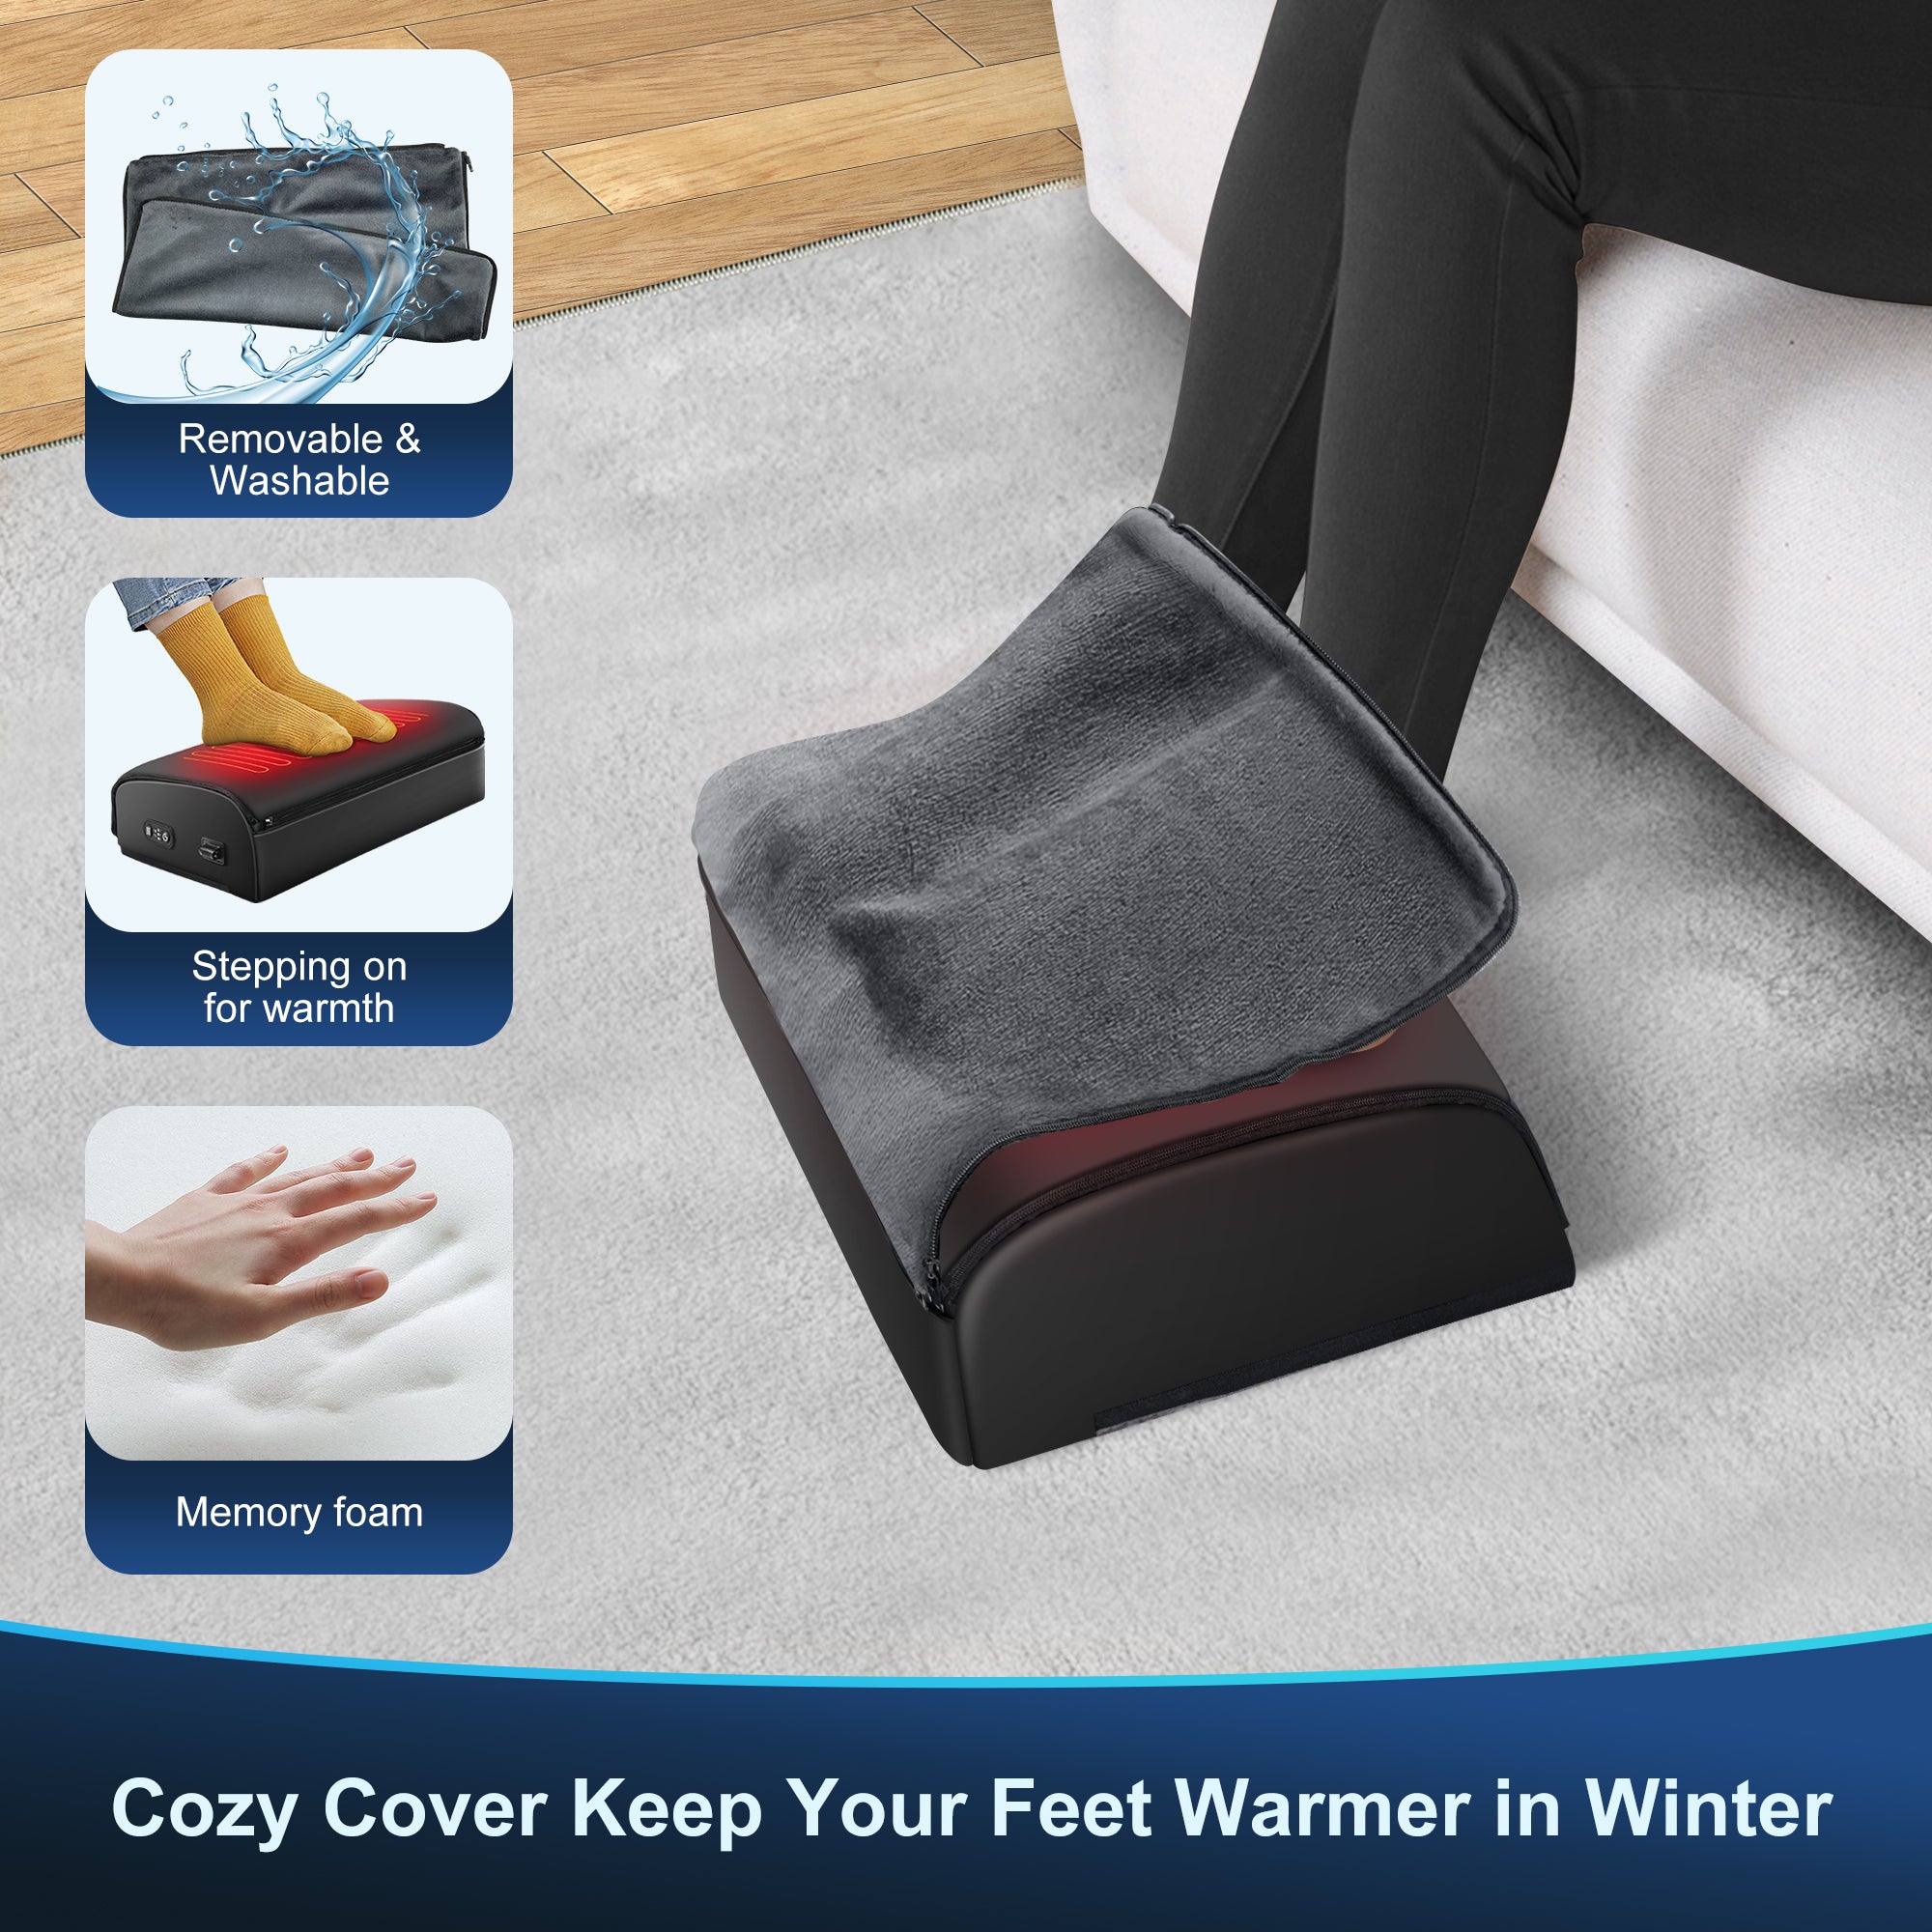 Valiant Heated Footrest with Adjustable Non-Slip Base for use under desk